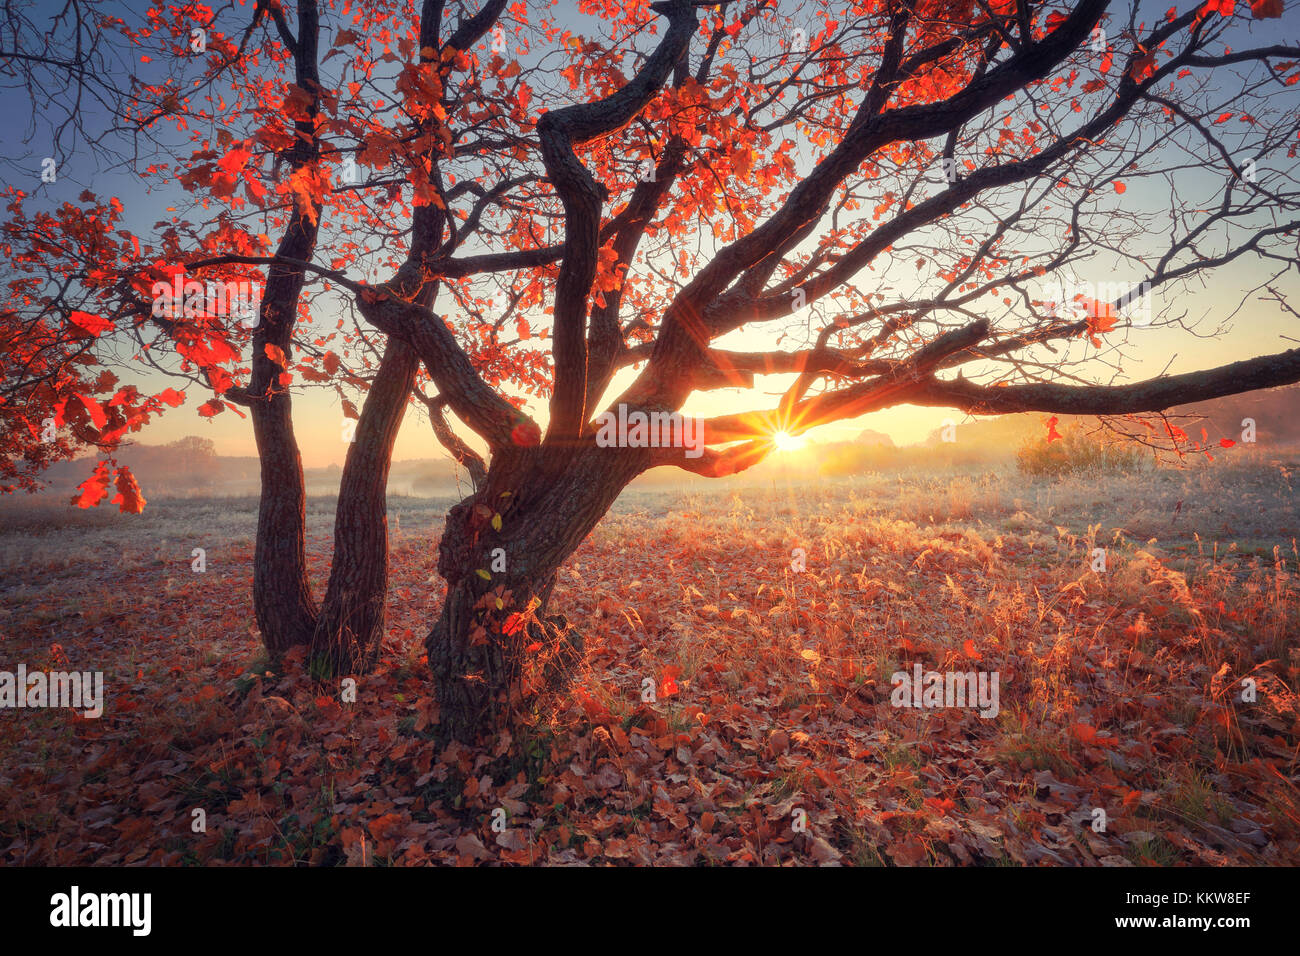 Autumn sunny scene. Tree with red  leaves illuminated by rising sun. Frosty scenic autumn landscape. Stock Photo